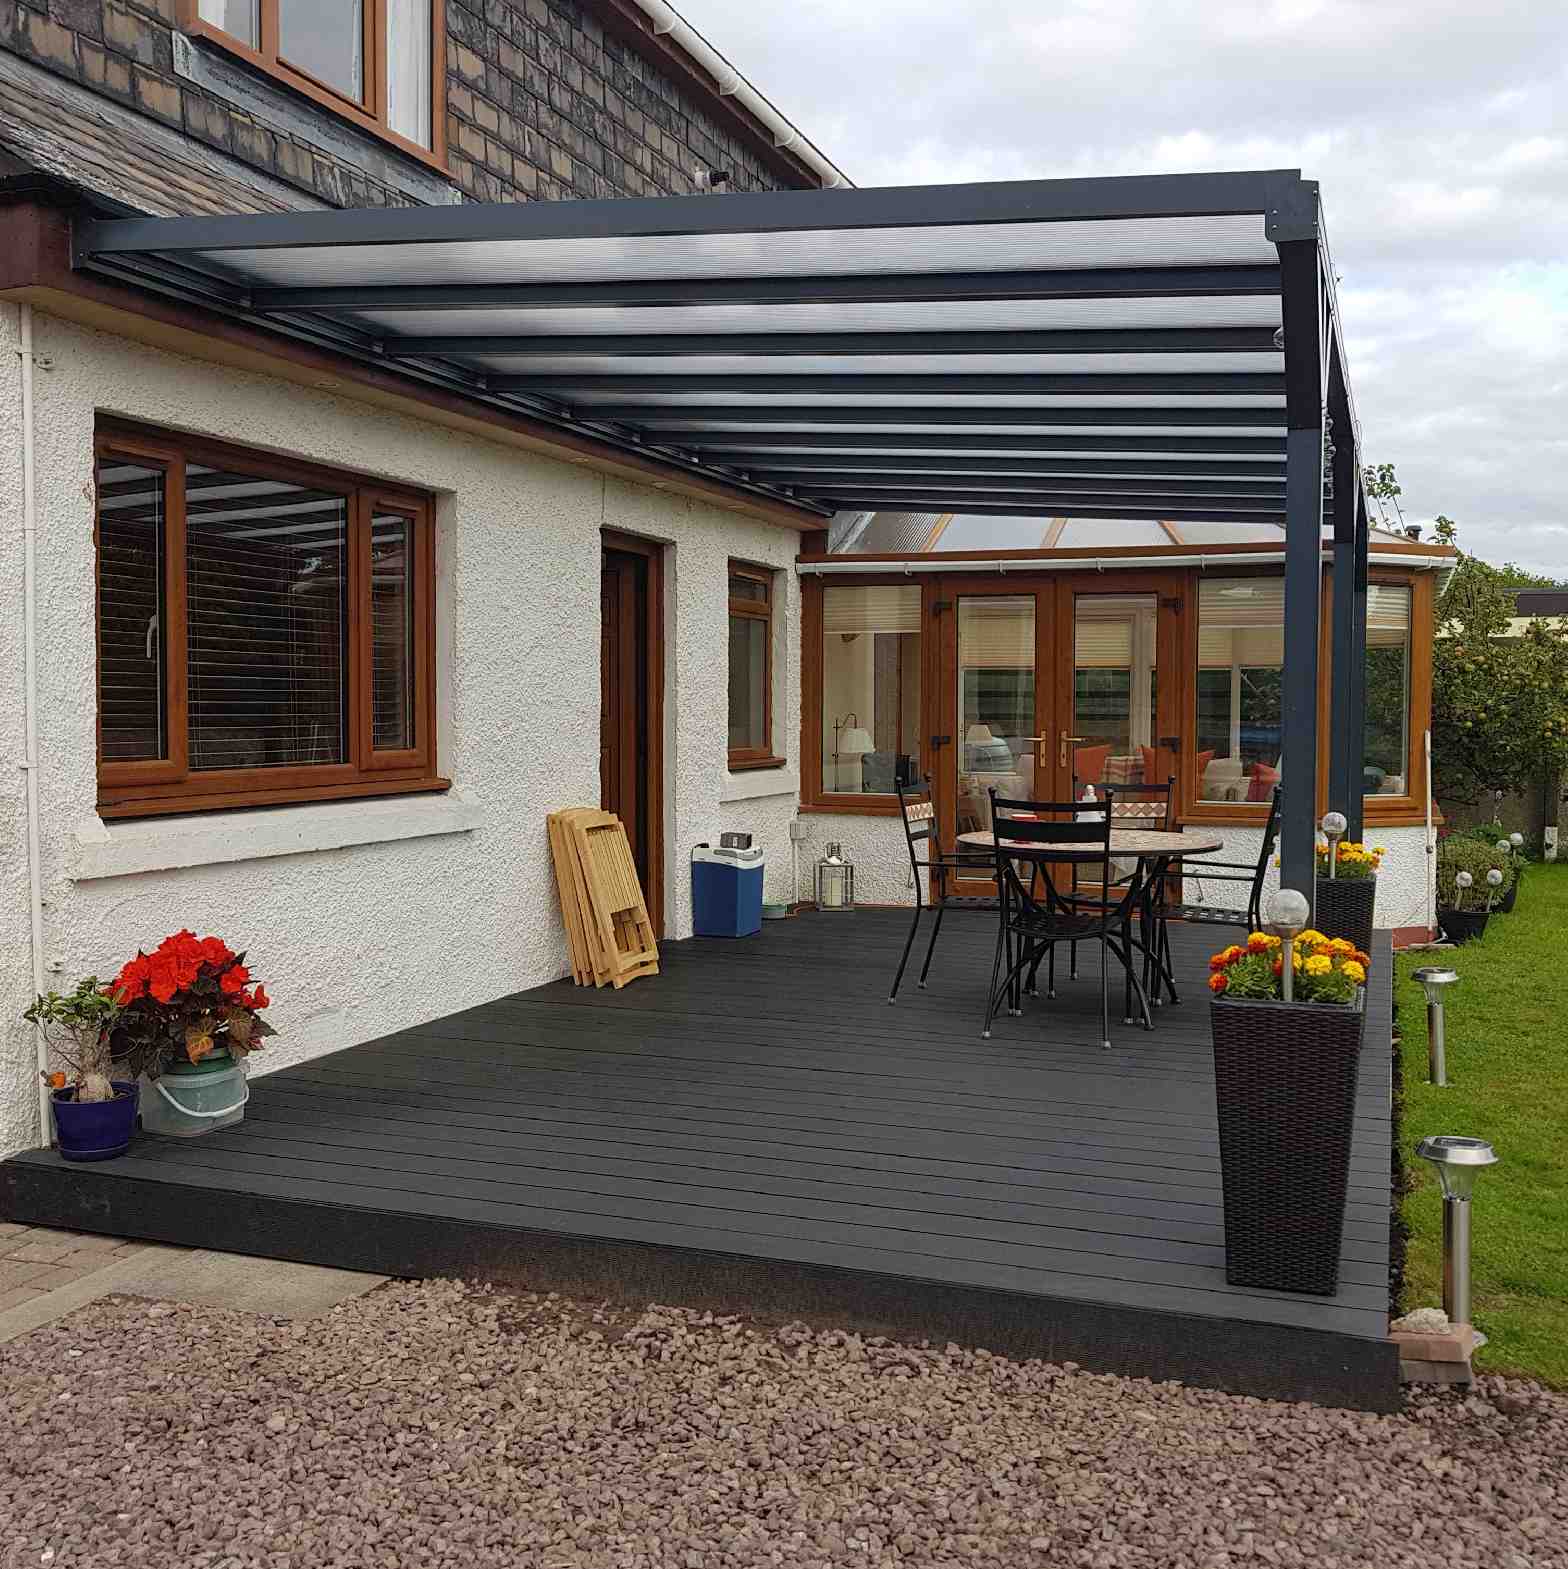 Buy Omega Verandah, Anthracite Grey, 16mm Polycarbonate Glazing - 6.0m (W) x 3.5m (P), (3) Supporting Posts online today